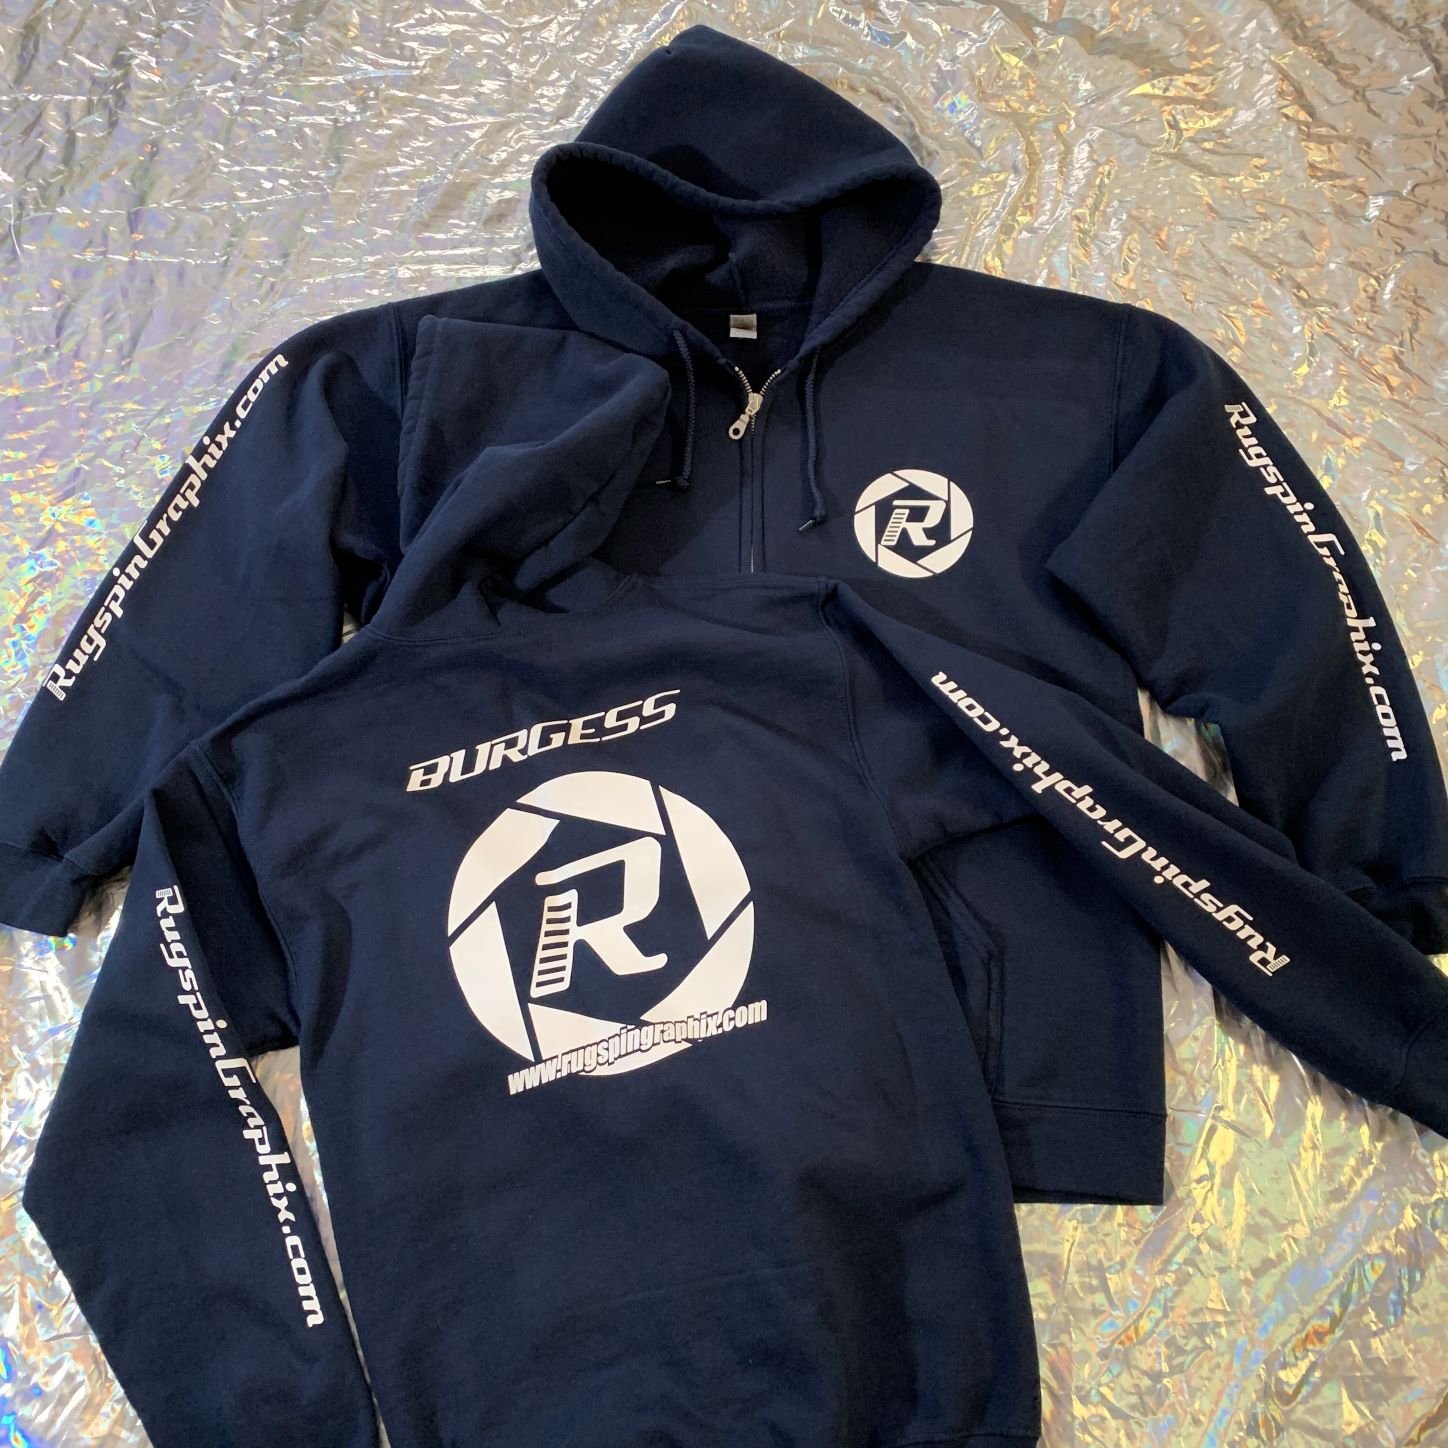 DYO - Design Your Own Hoodies - RC SWAG - Stickers, T-Shirts, Hoodies ...